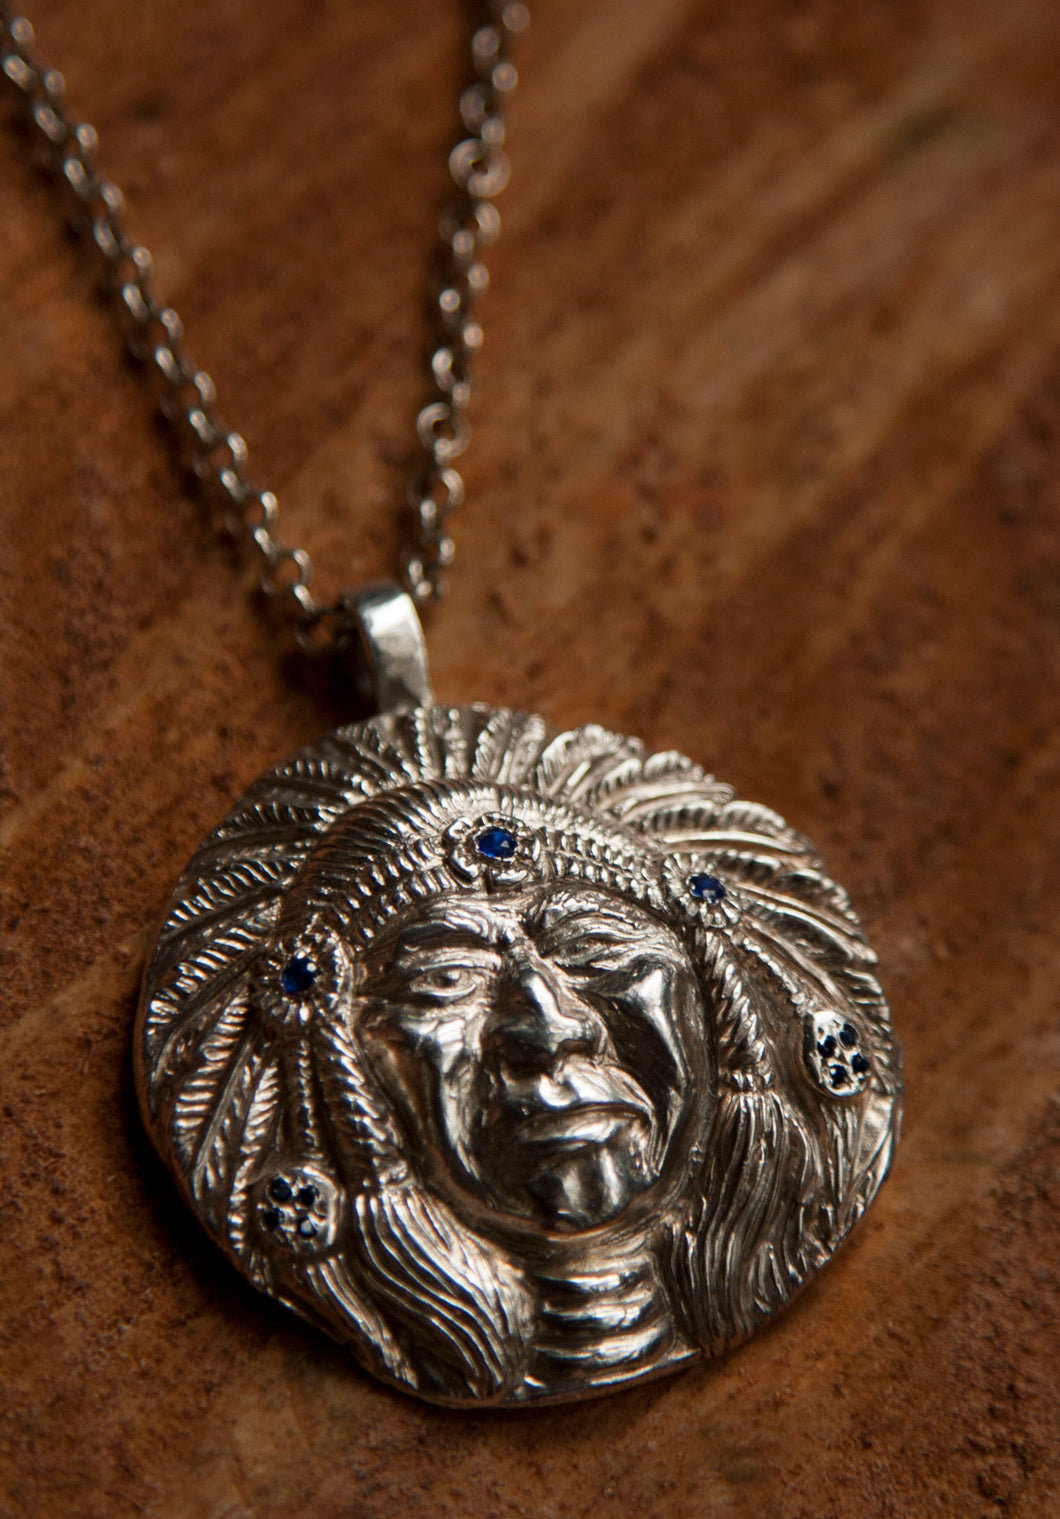 Indian Chief Head Necklace